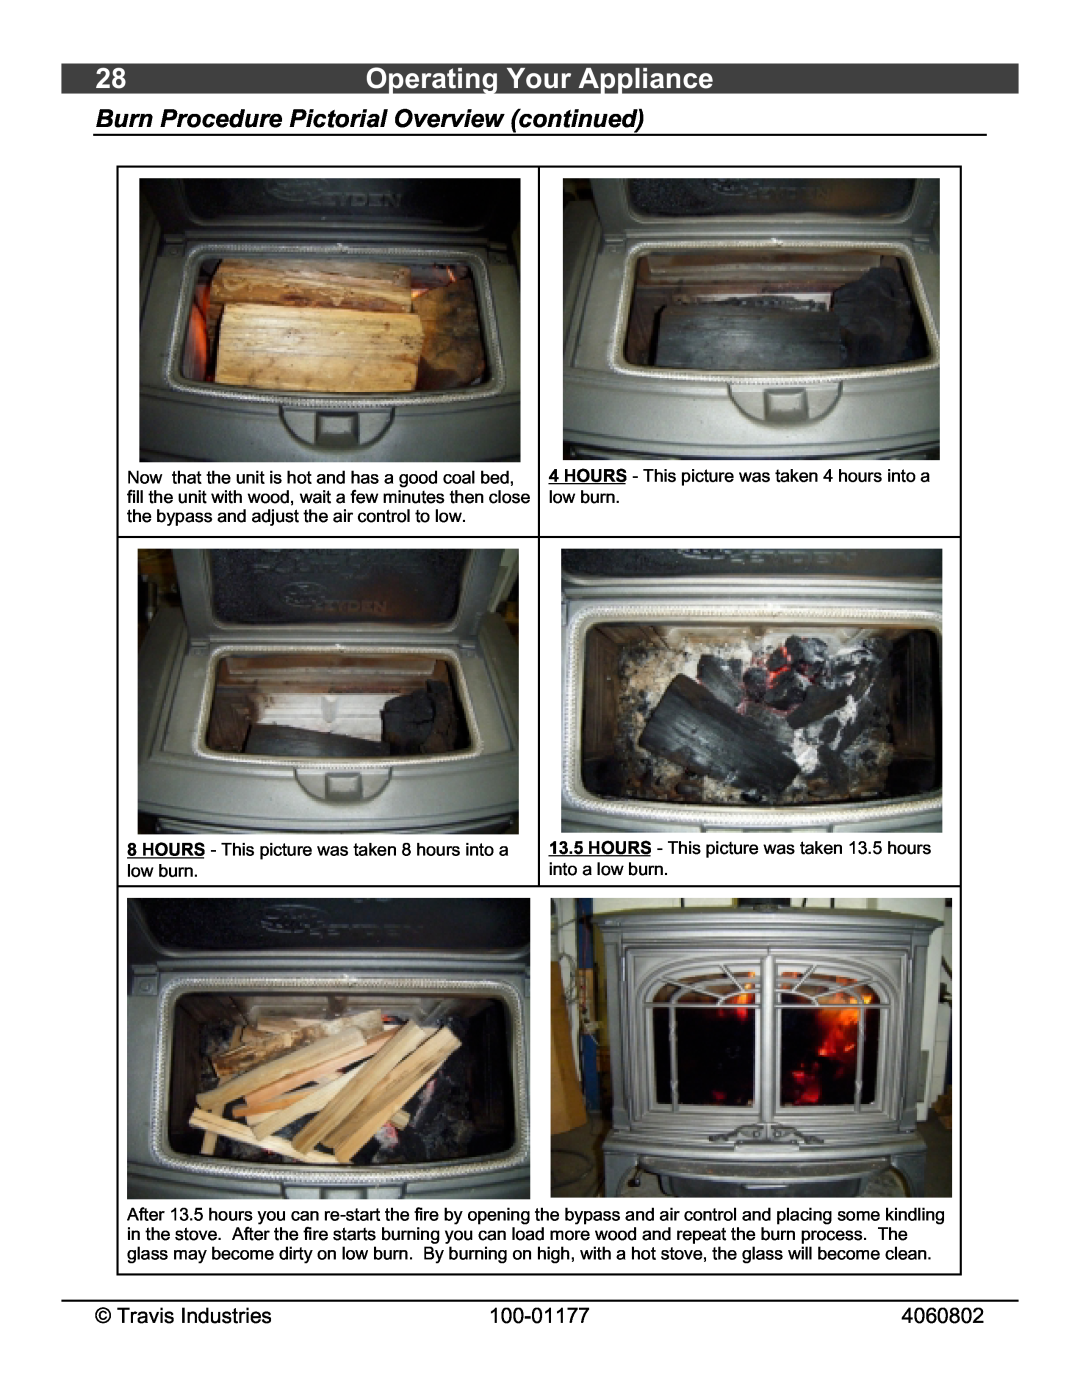 Lopi Stove owner manual Operating Your Appliance, Burn Procedure Pictorial Overview continued 